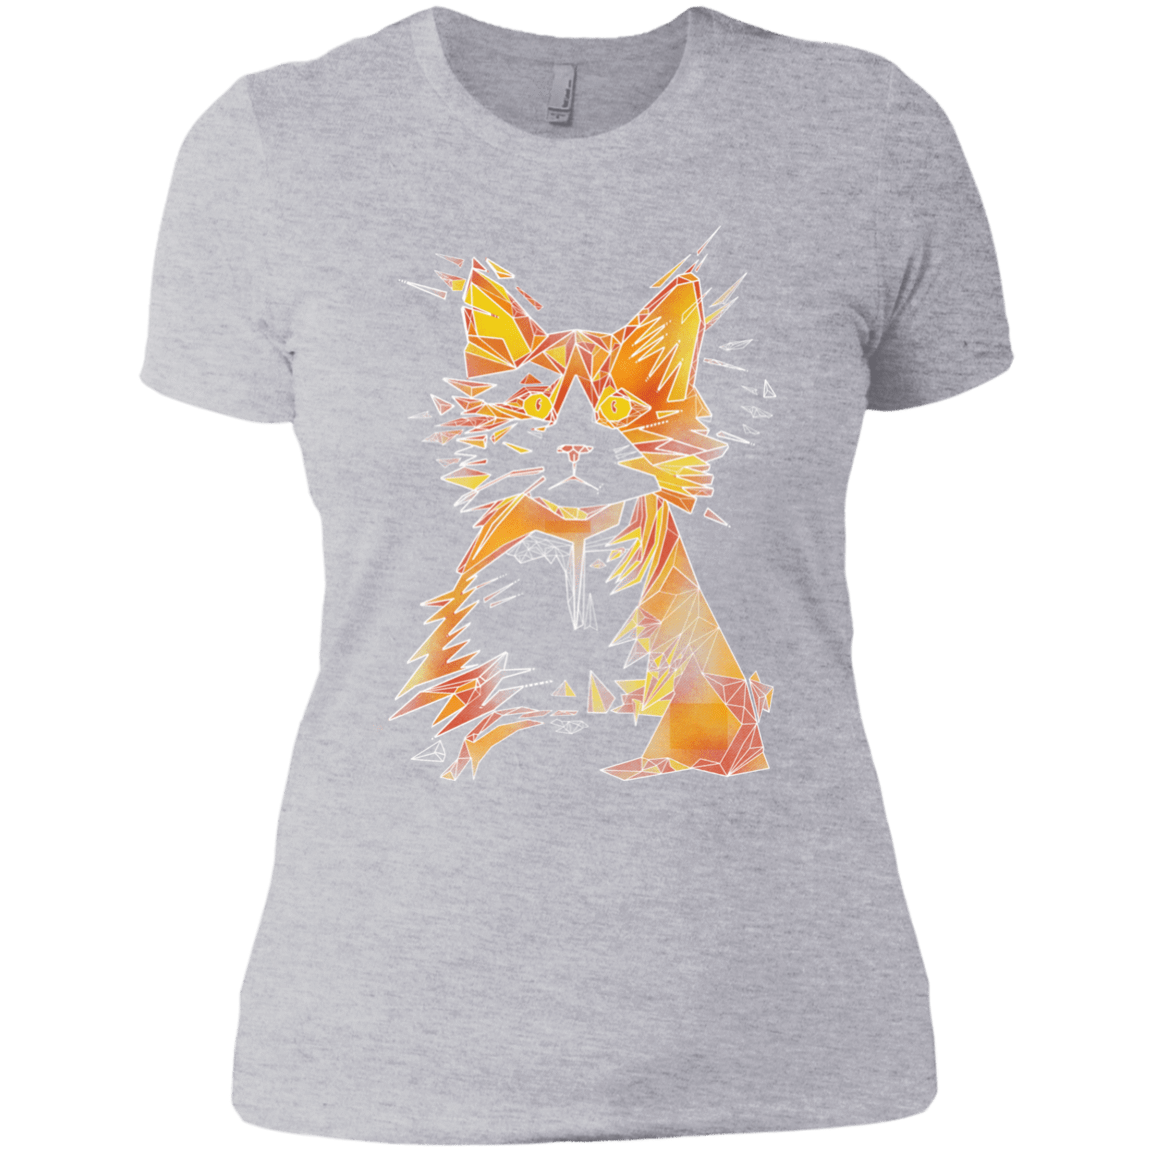 T-Shirts Heather Grey / X-Small Scattered Women's Premium T-Shirt